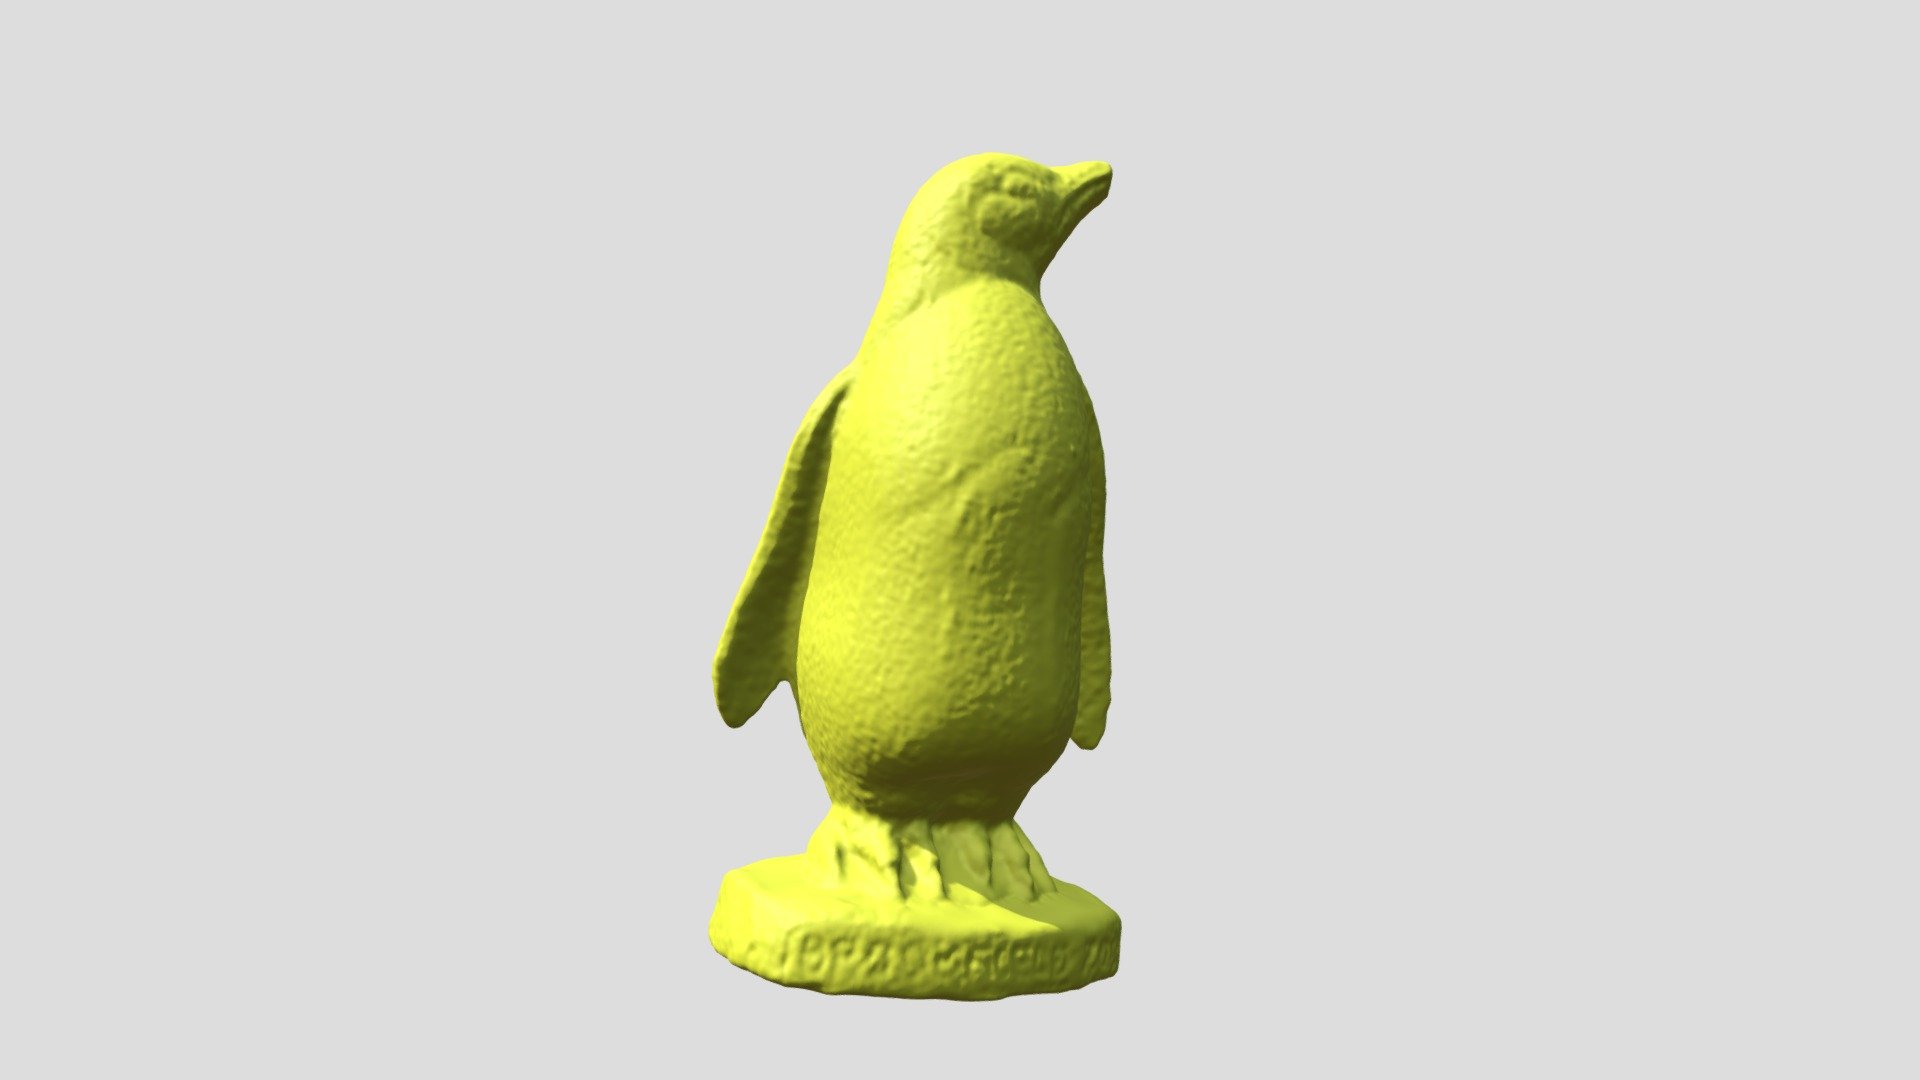 This Mold-A-Rama penguin figurine from the Brookfield Zoo was 3D scanned with a NextEngine Desktop 3D scanner in January 2021 3d model